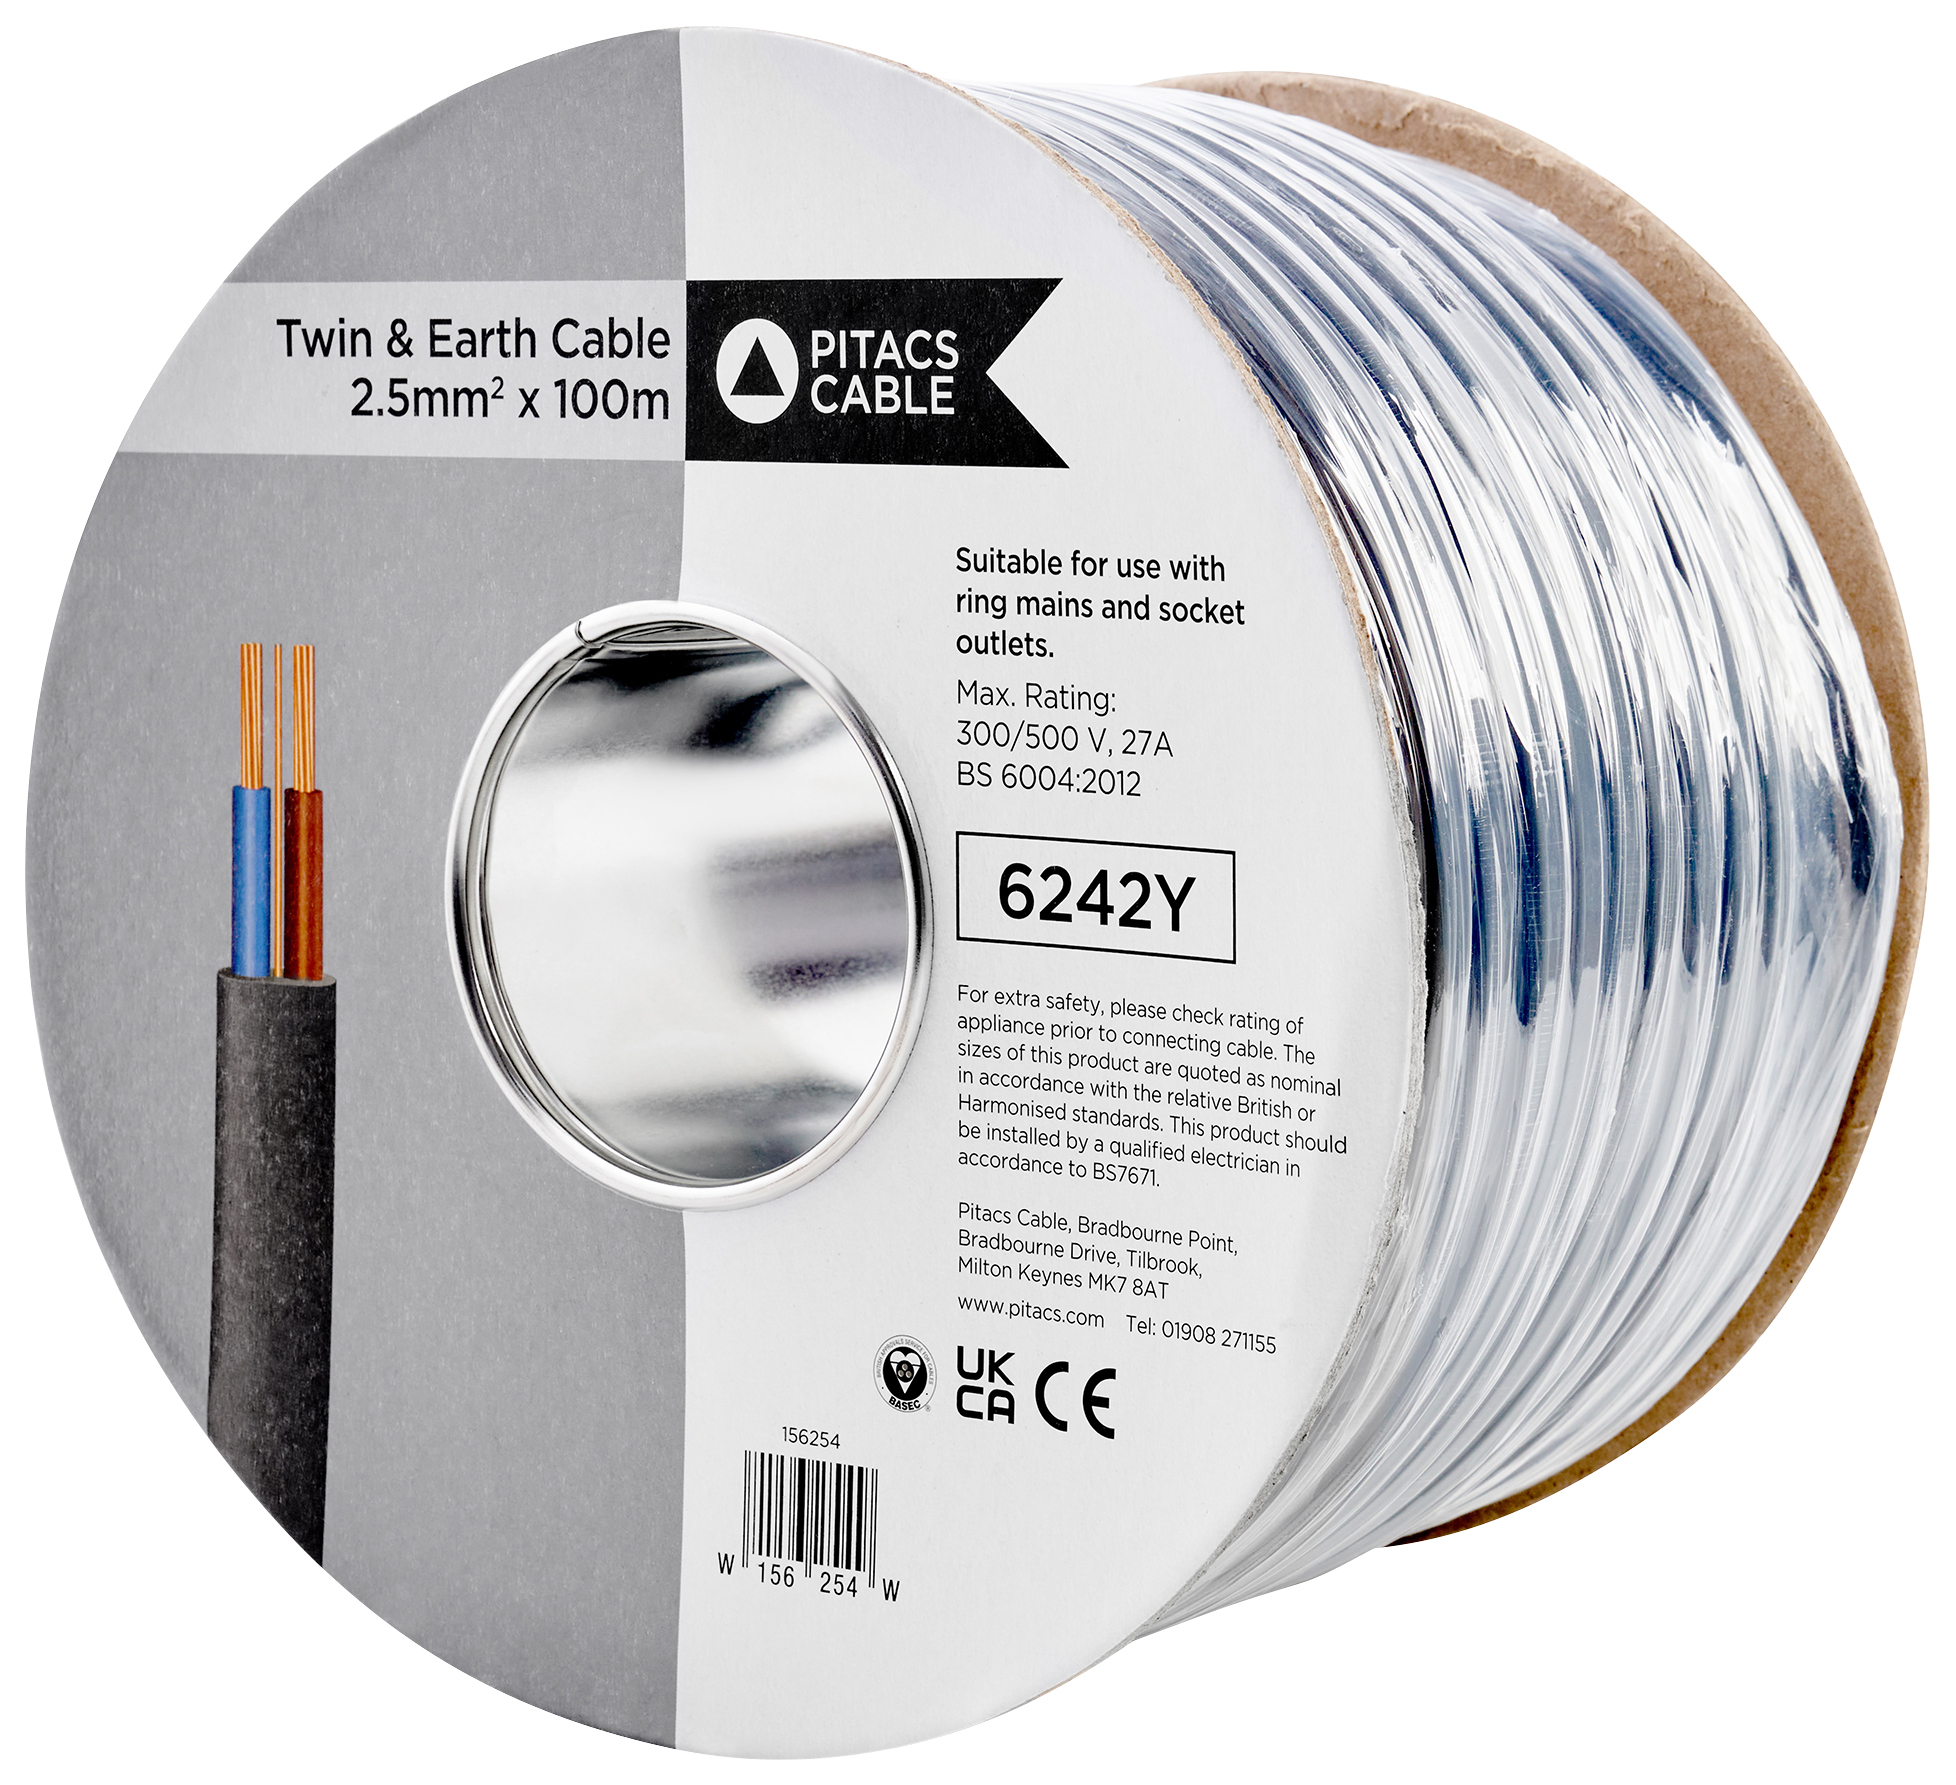 Twin & Earth Cable - 2.5mm2 x 100m